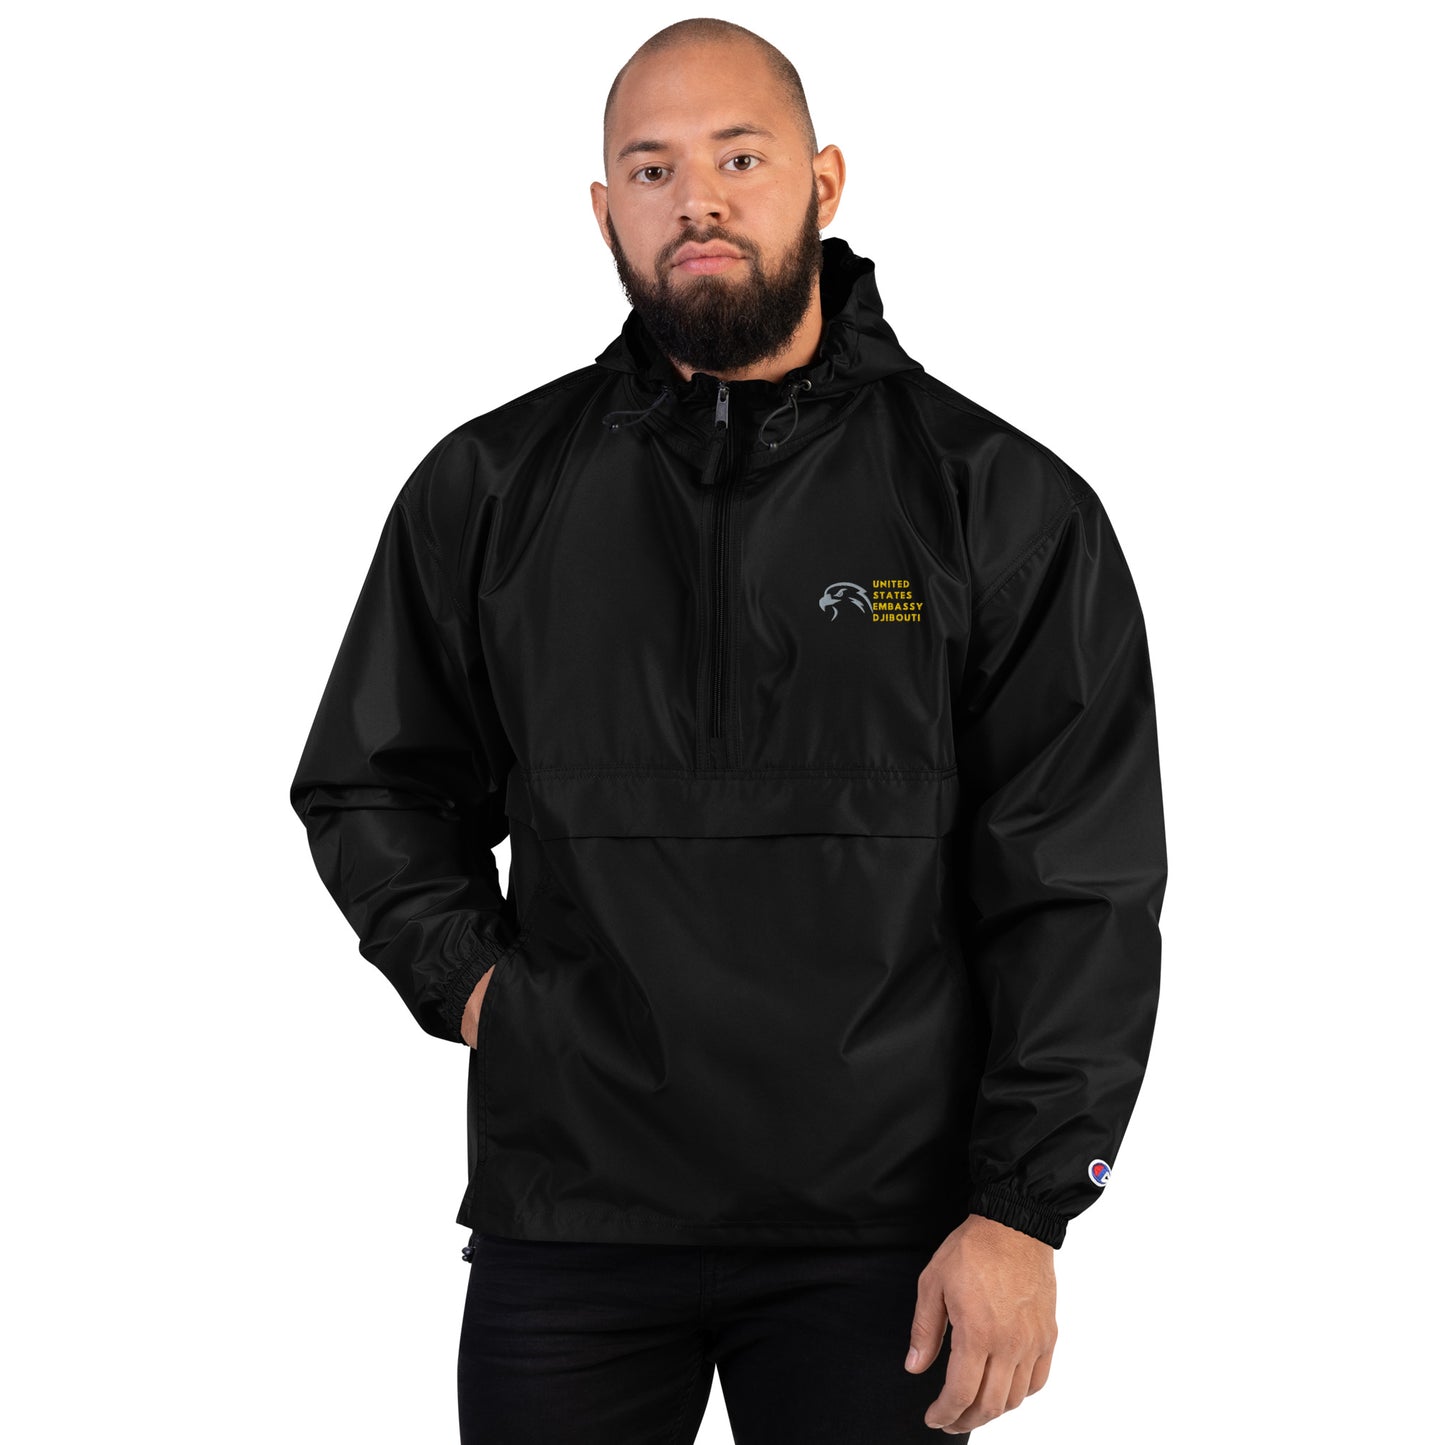 Champion Brand Embroidered Packable Jacket: Djibouti